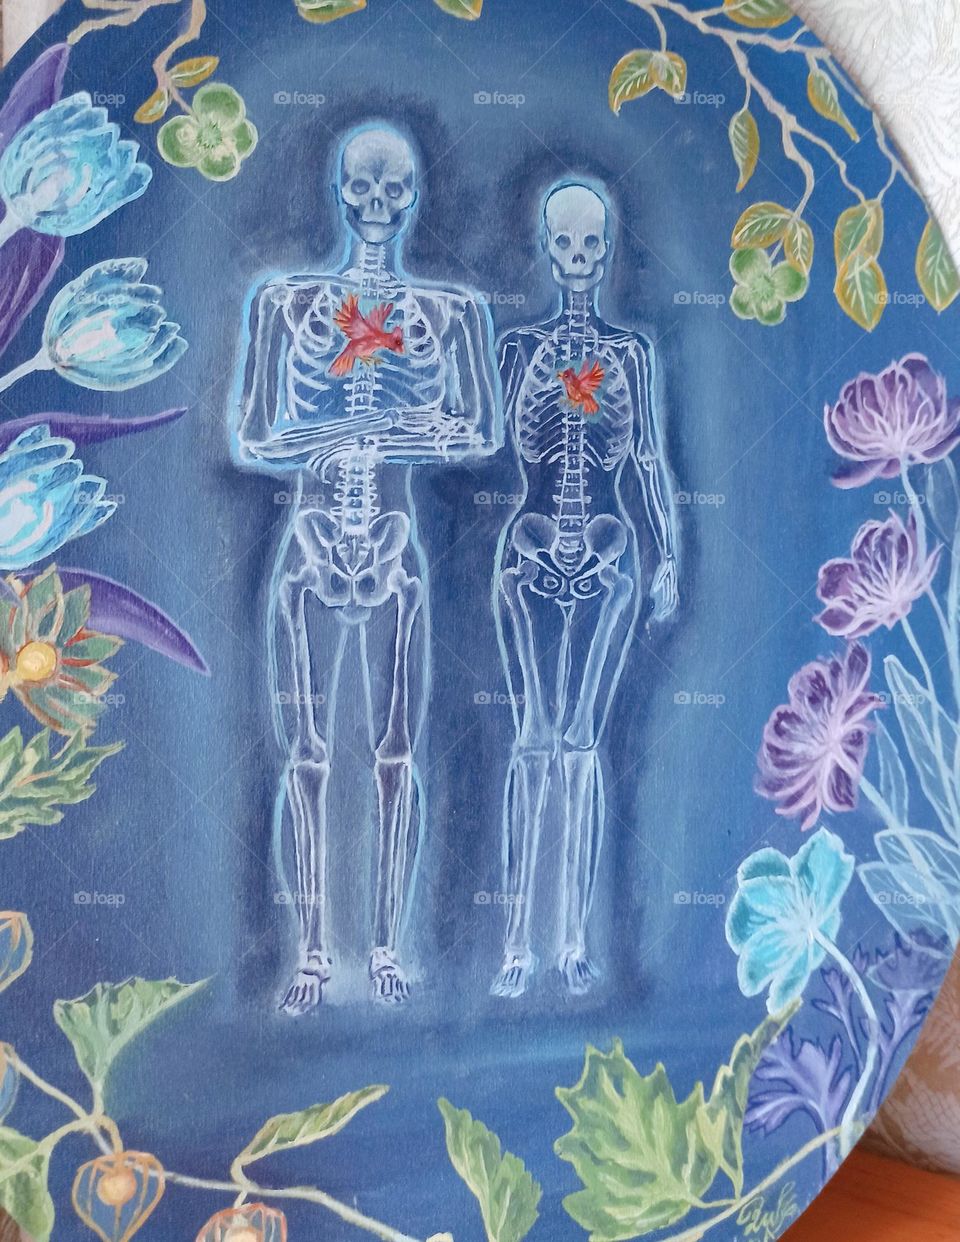 do-it-yourself painting two skeletons in love, with meaning